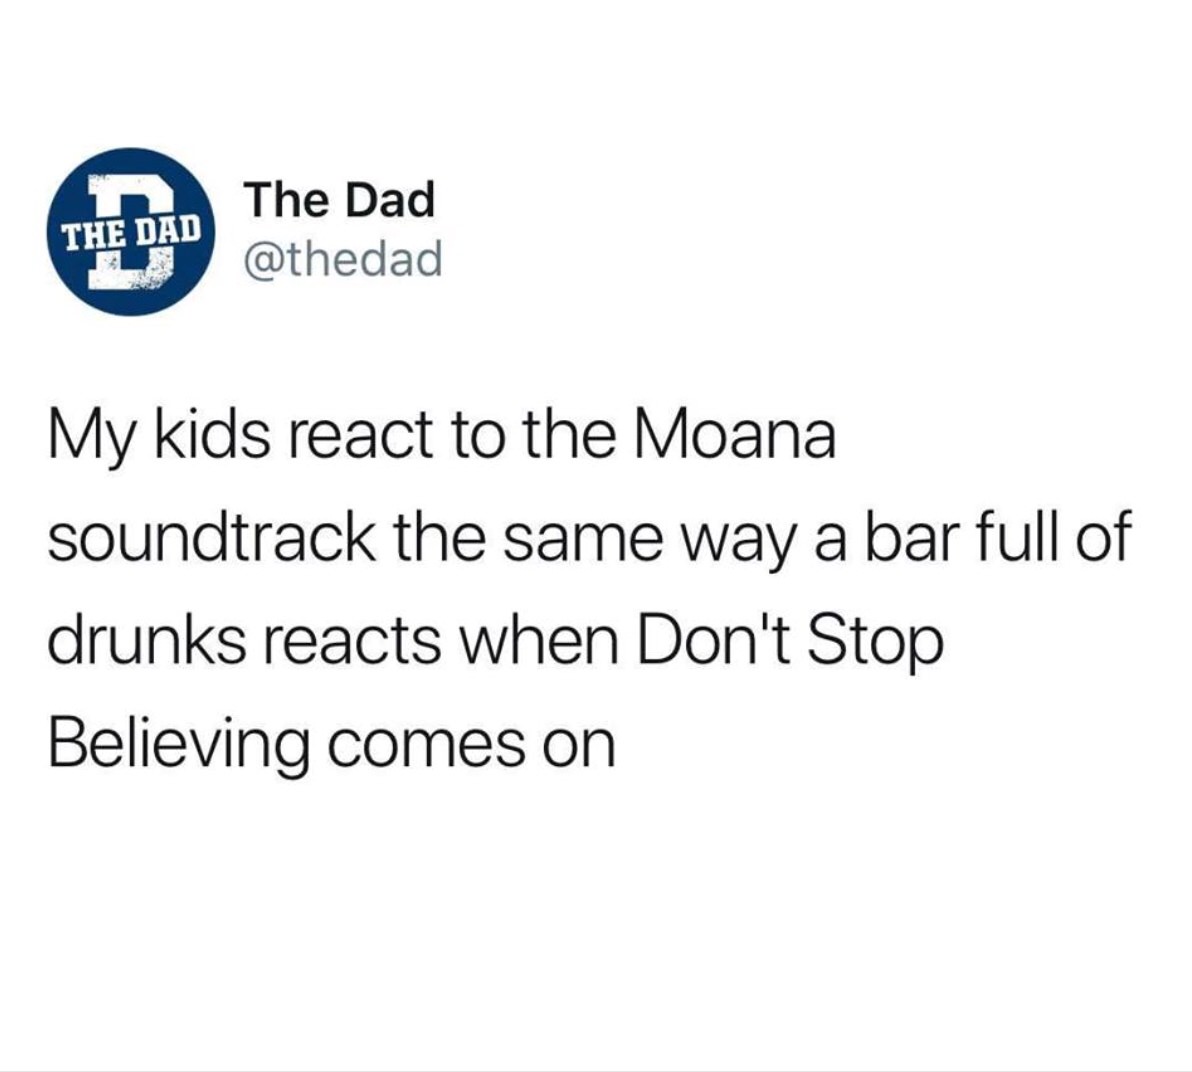 people who overthink also overlove - The Dad The Dad My kids react to the Moana soundtrack the same way a bar full of drunks reacts when Don't Stop Believing comes on